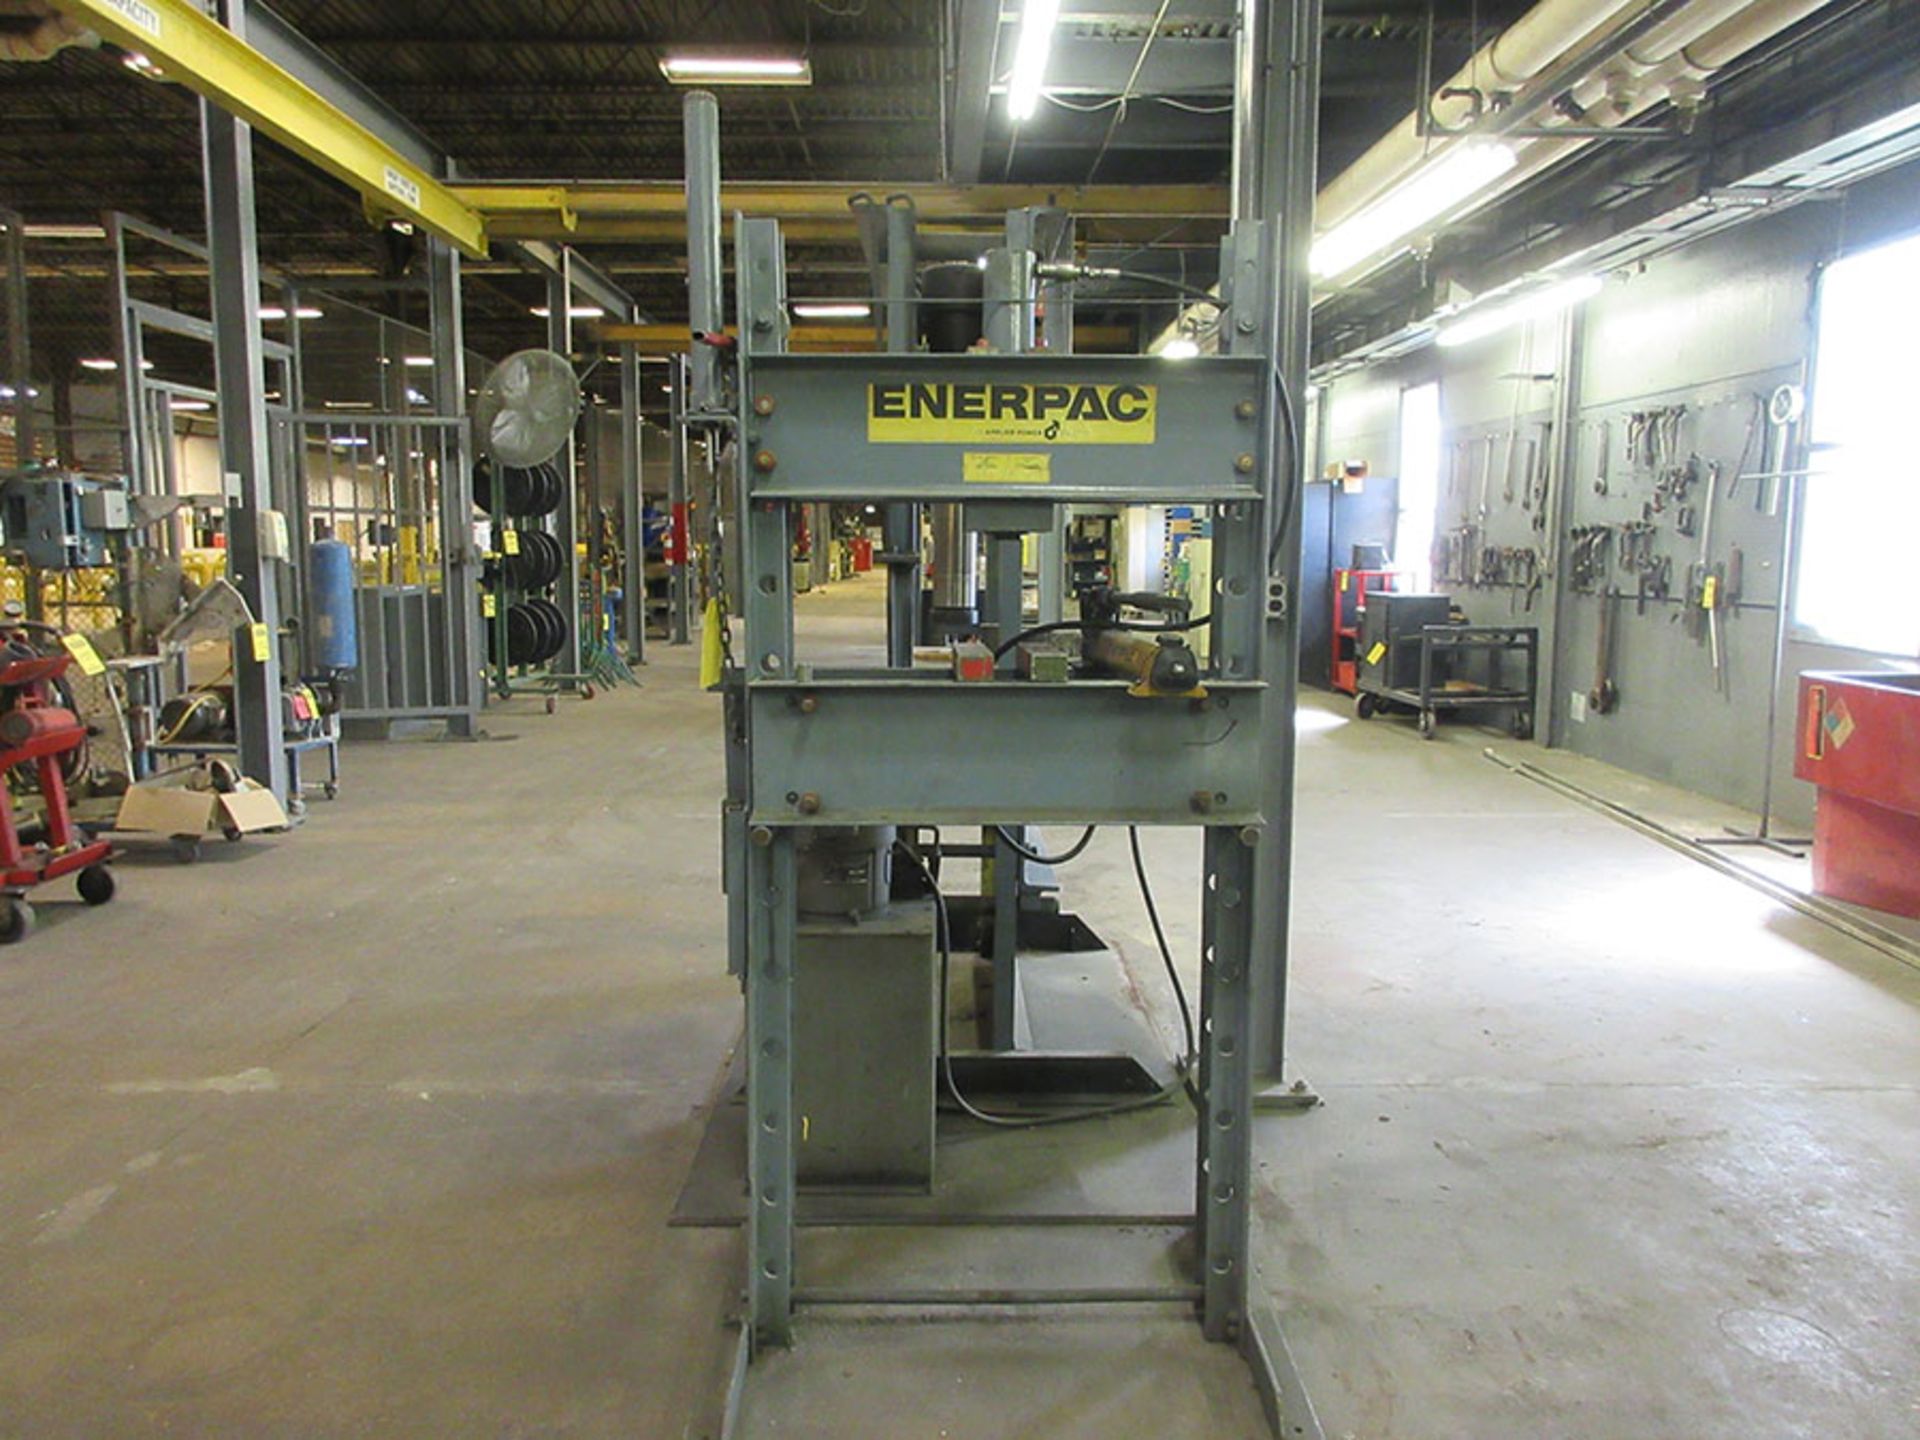 ENERPAC 25-TON H-FRAME HYDRAULIC PRESS; (12 1/2 TON EXTREME OFF CENTER CAPACITY) ADJUSTABLE